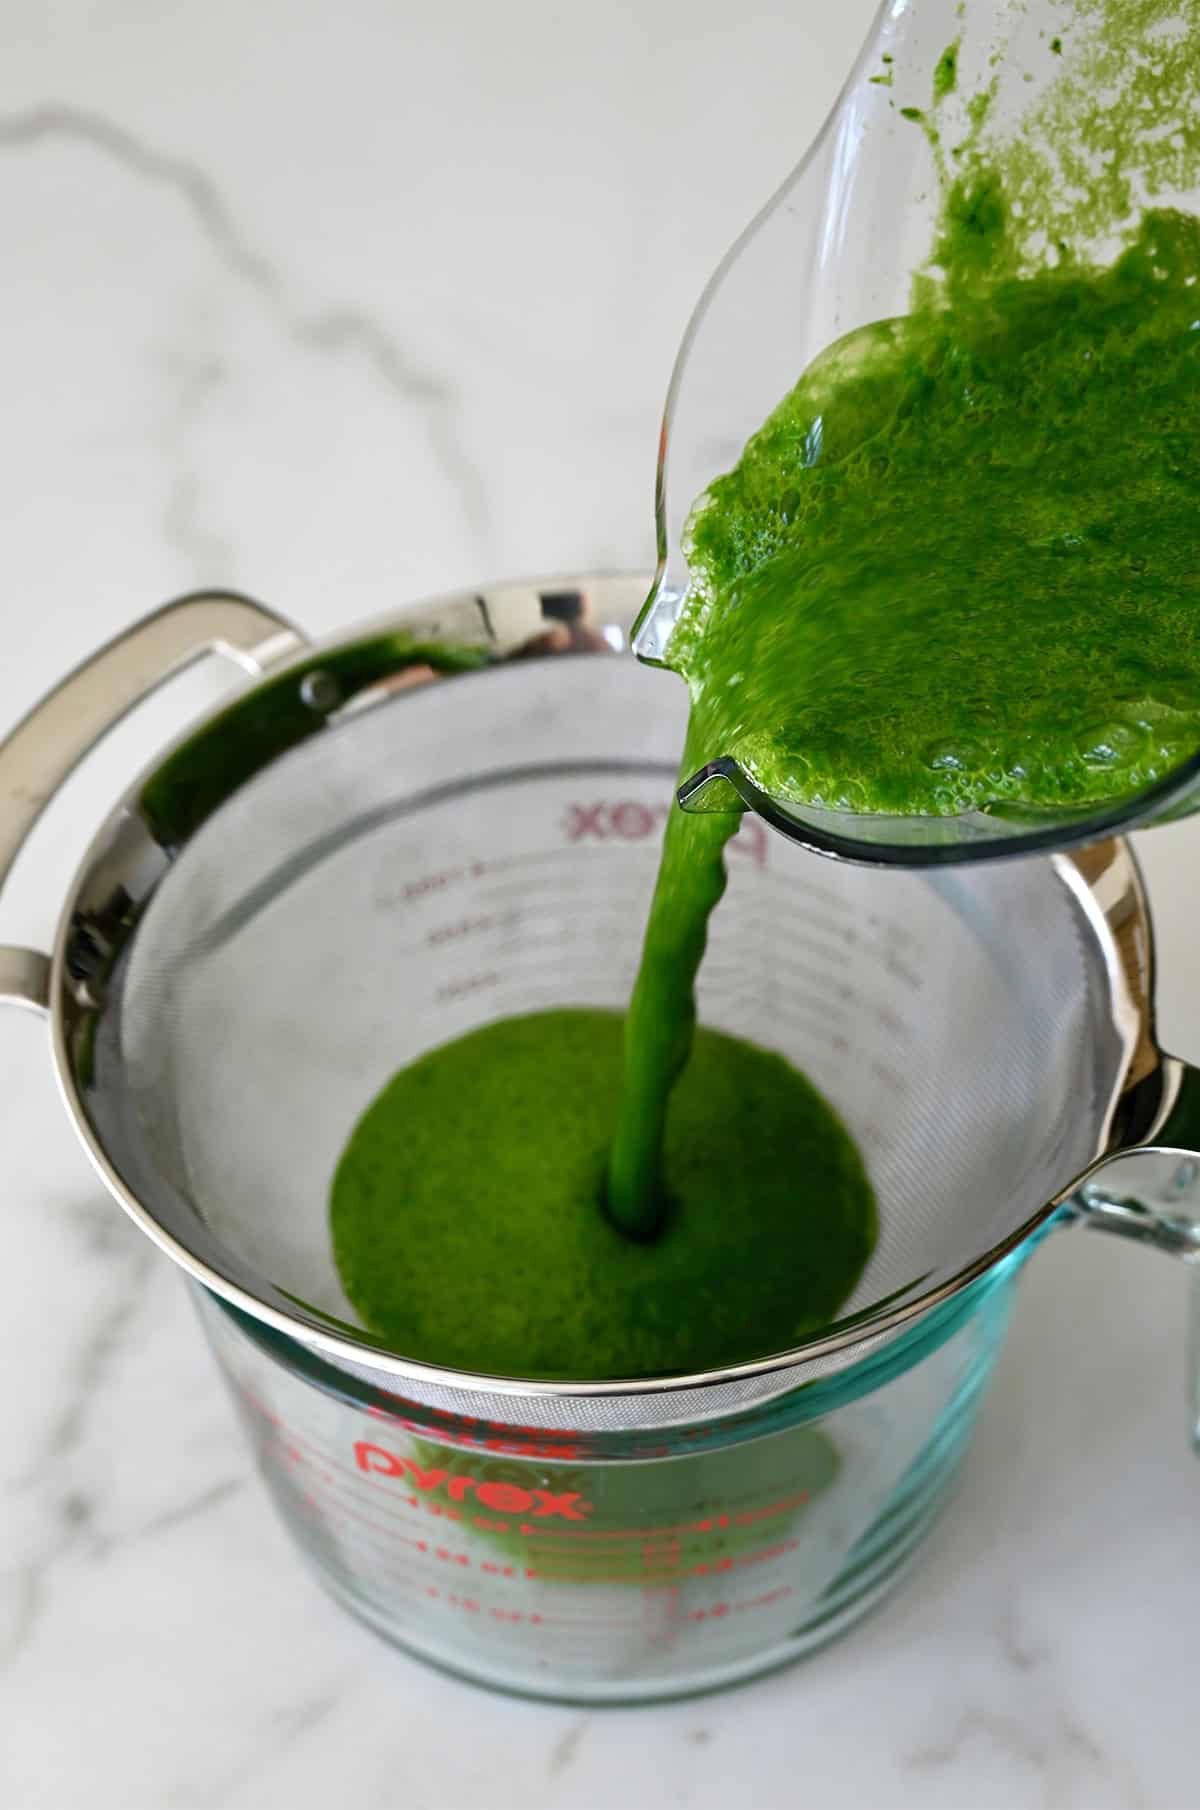 Green juice is poured through a fine mesh strainer into a glass measuring cup.